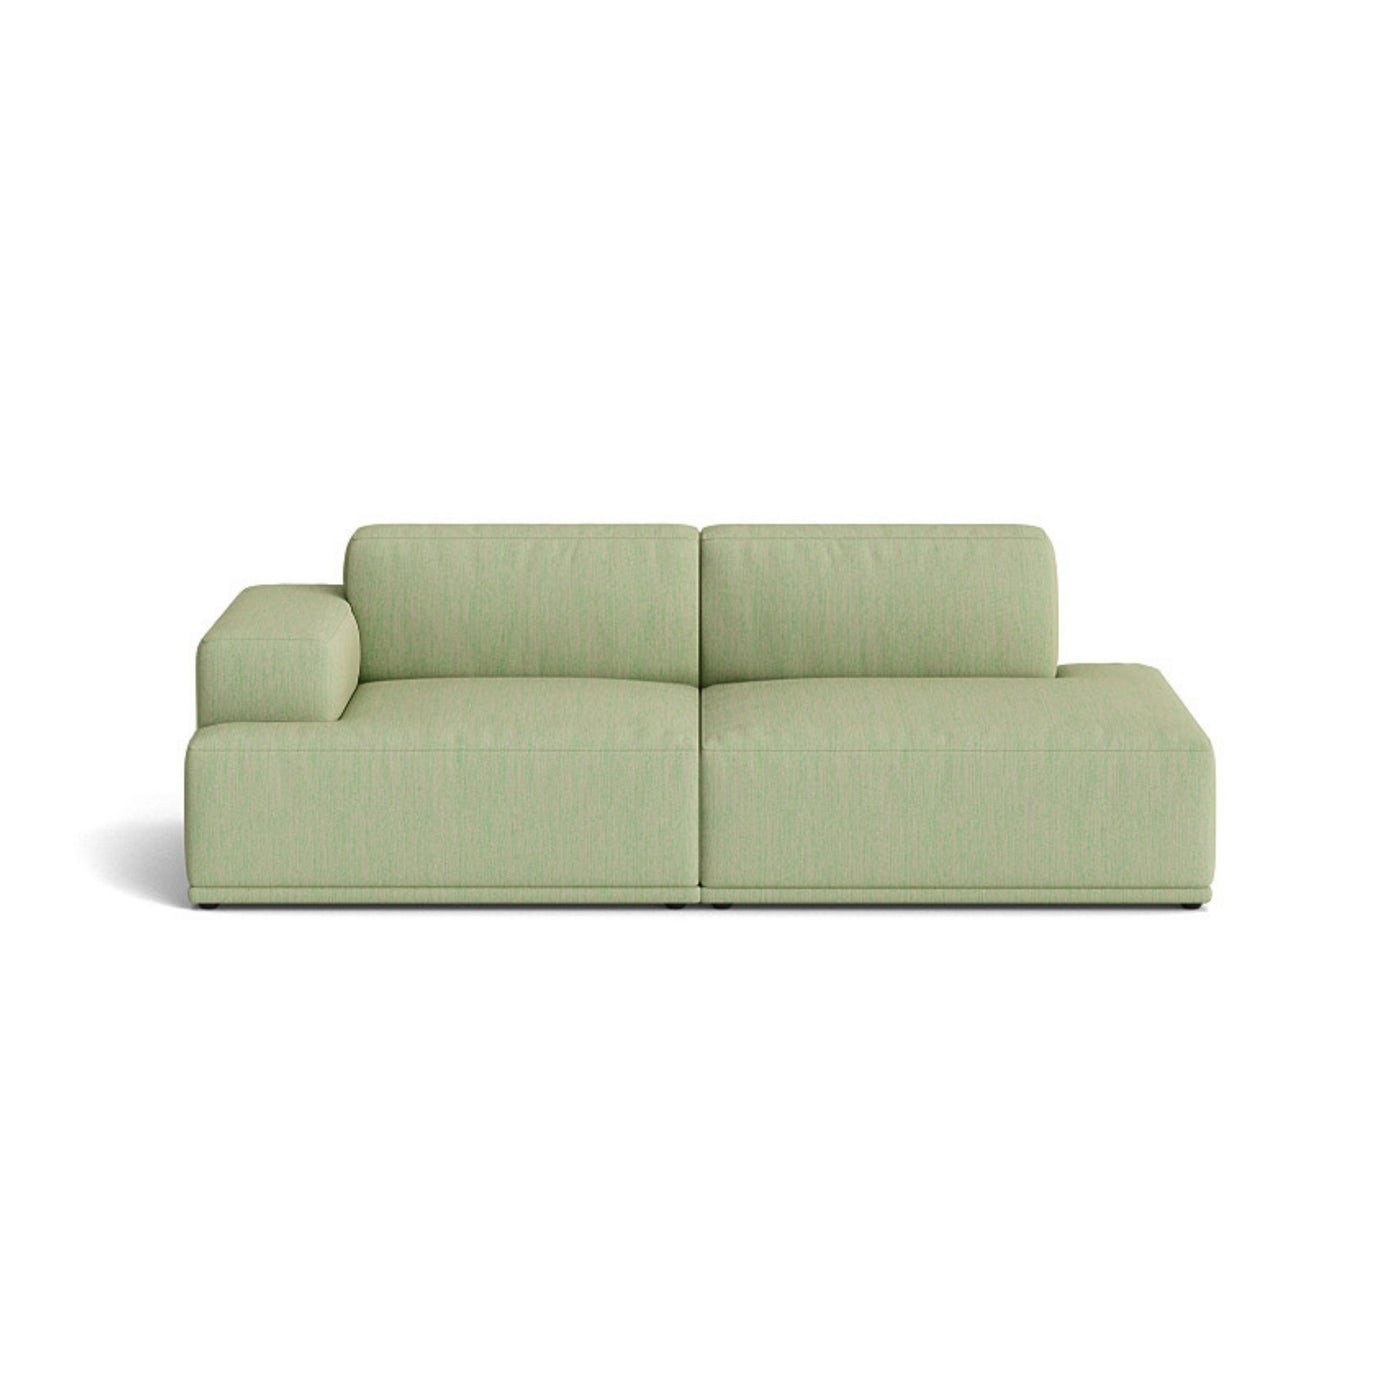 Muuto Connect Soft Modular 2 Seater Sofa, configuration 2. made-to-order from someday designs. #colour_balder-942